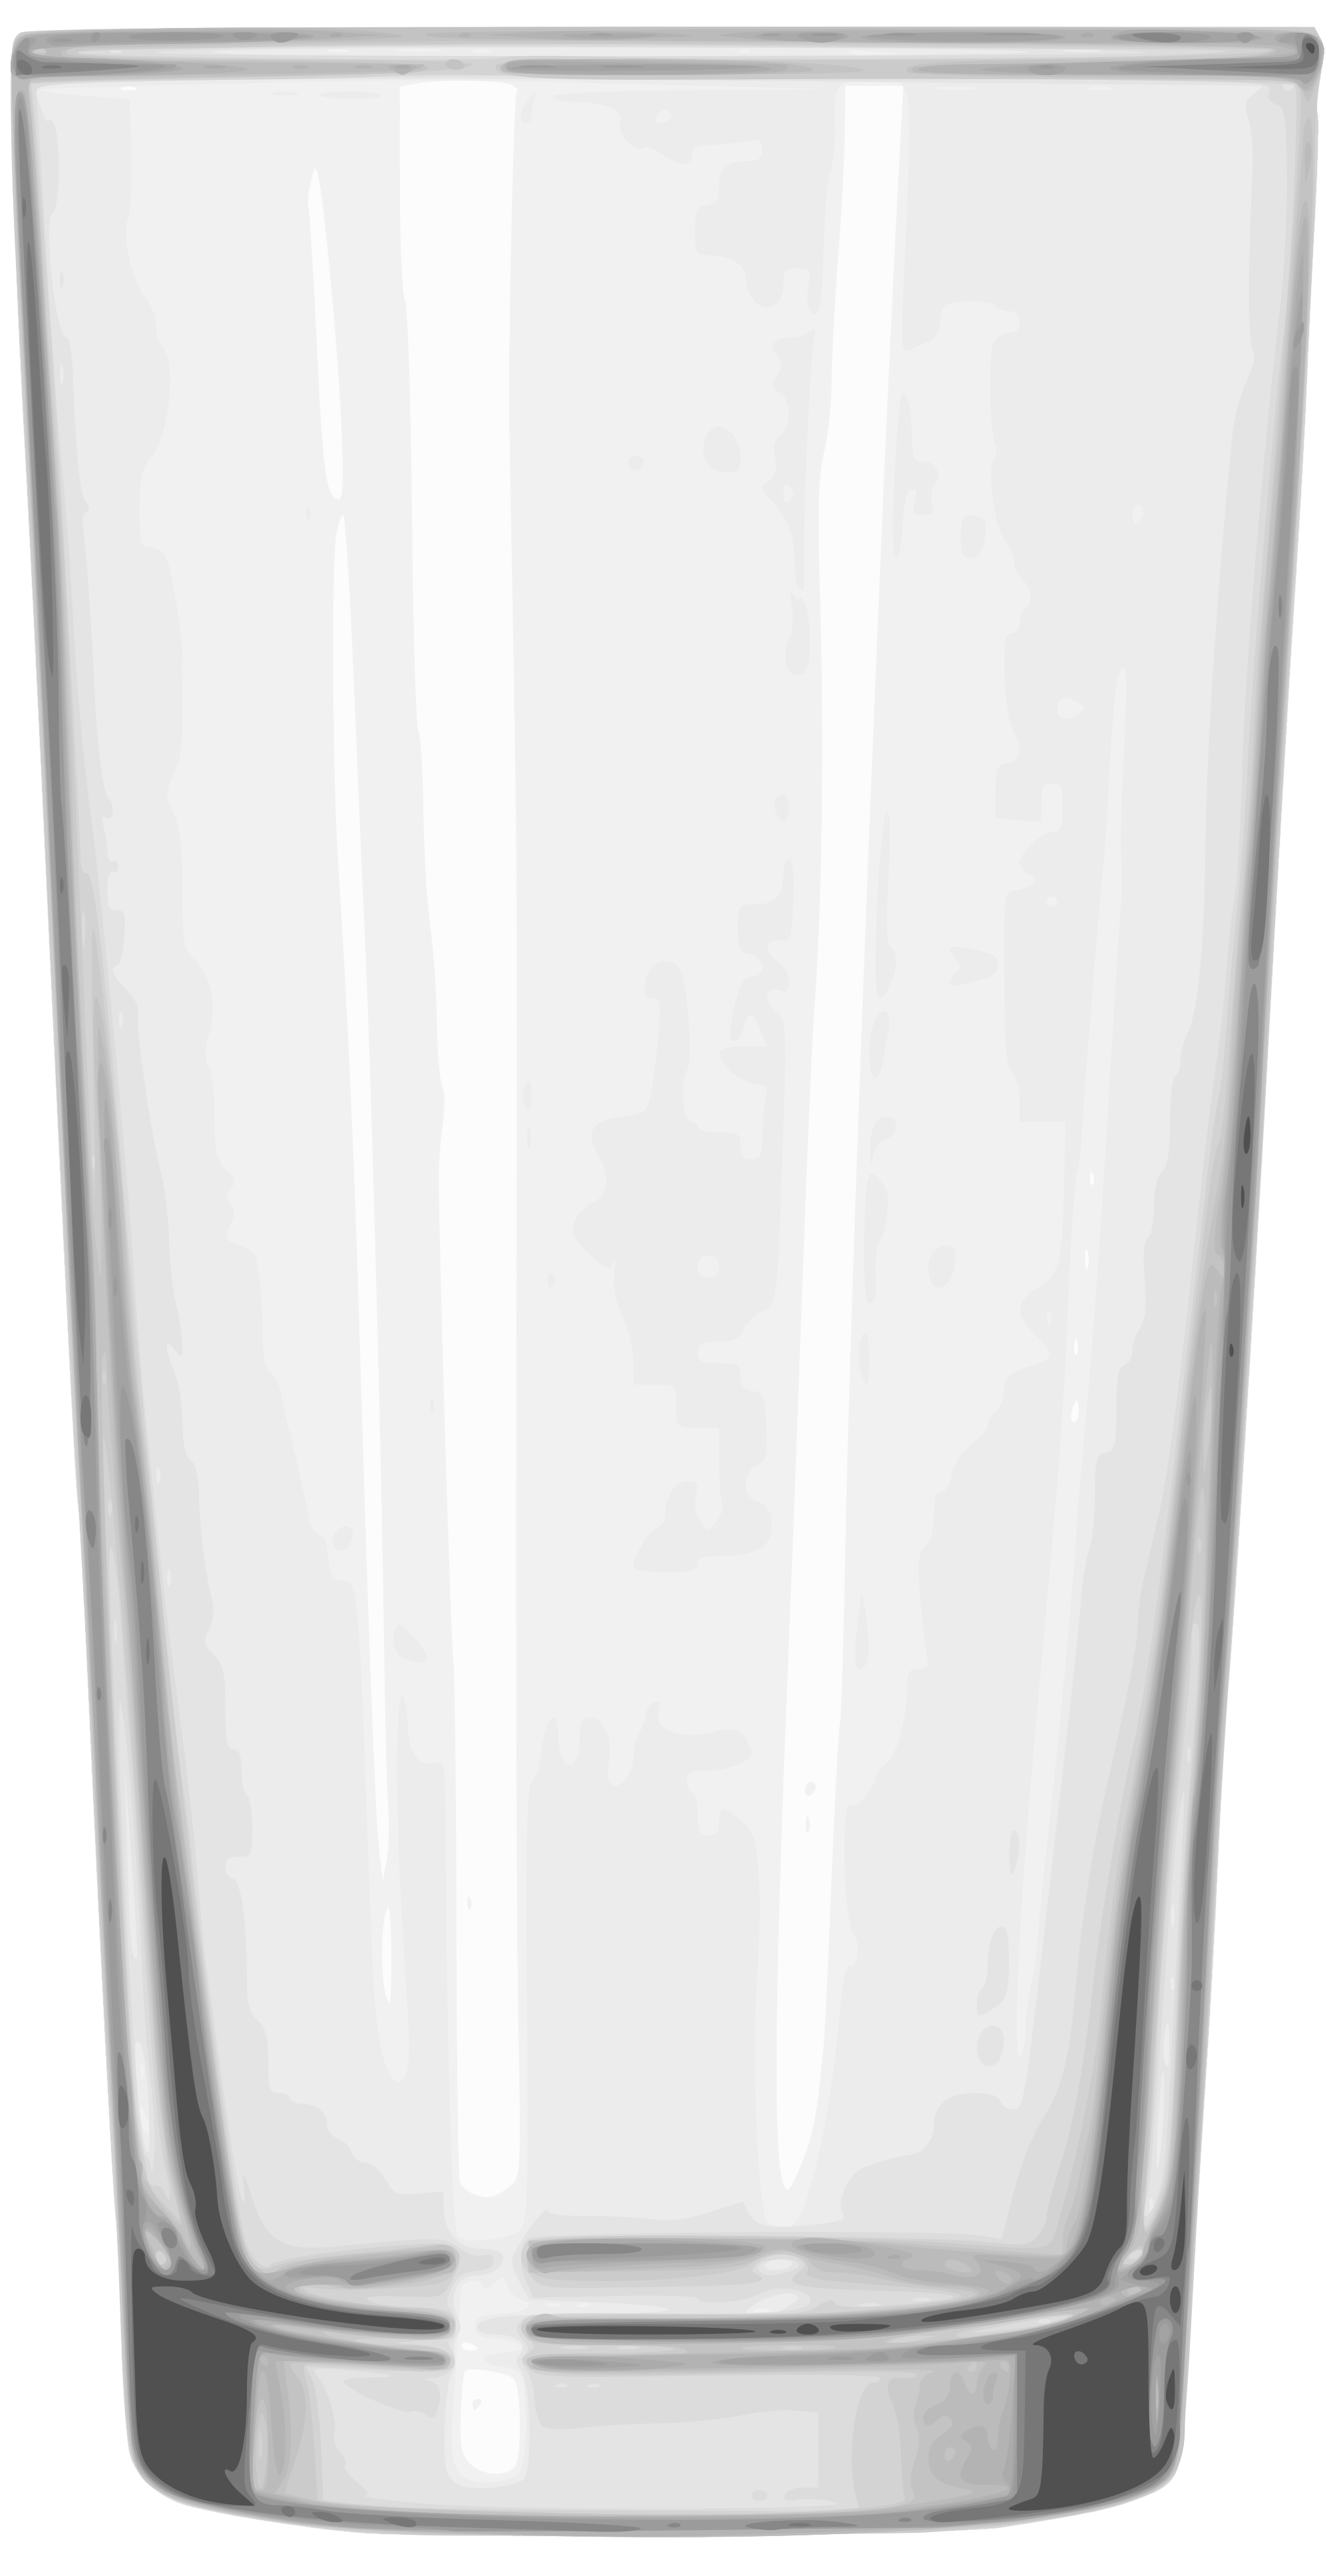 Glass PNG